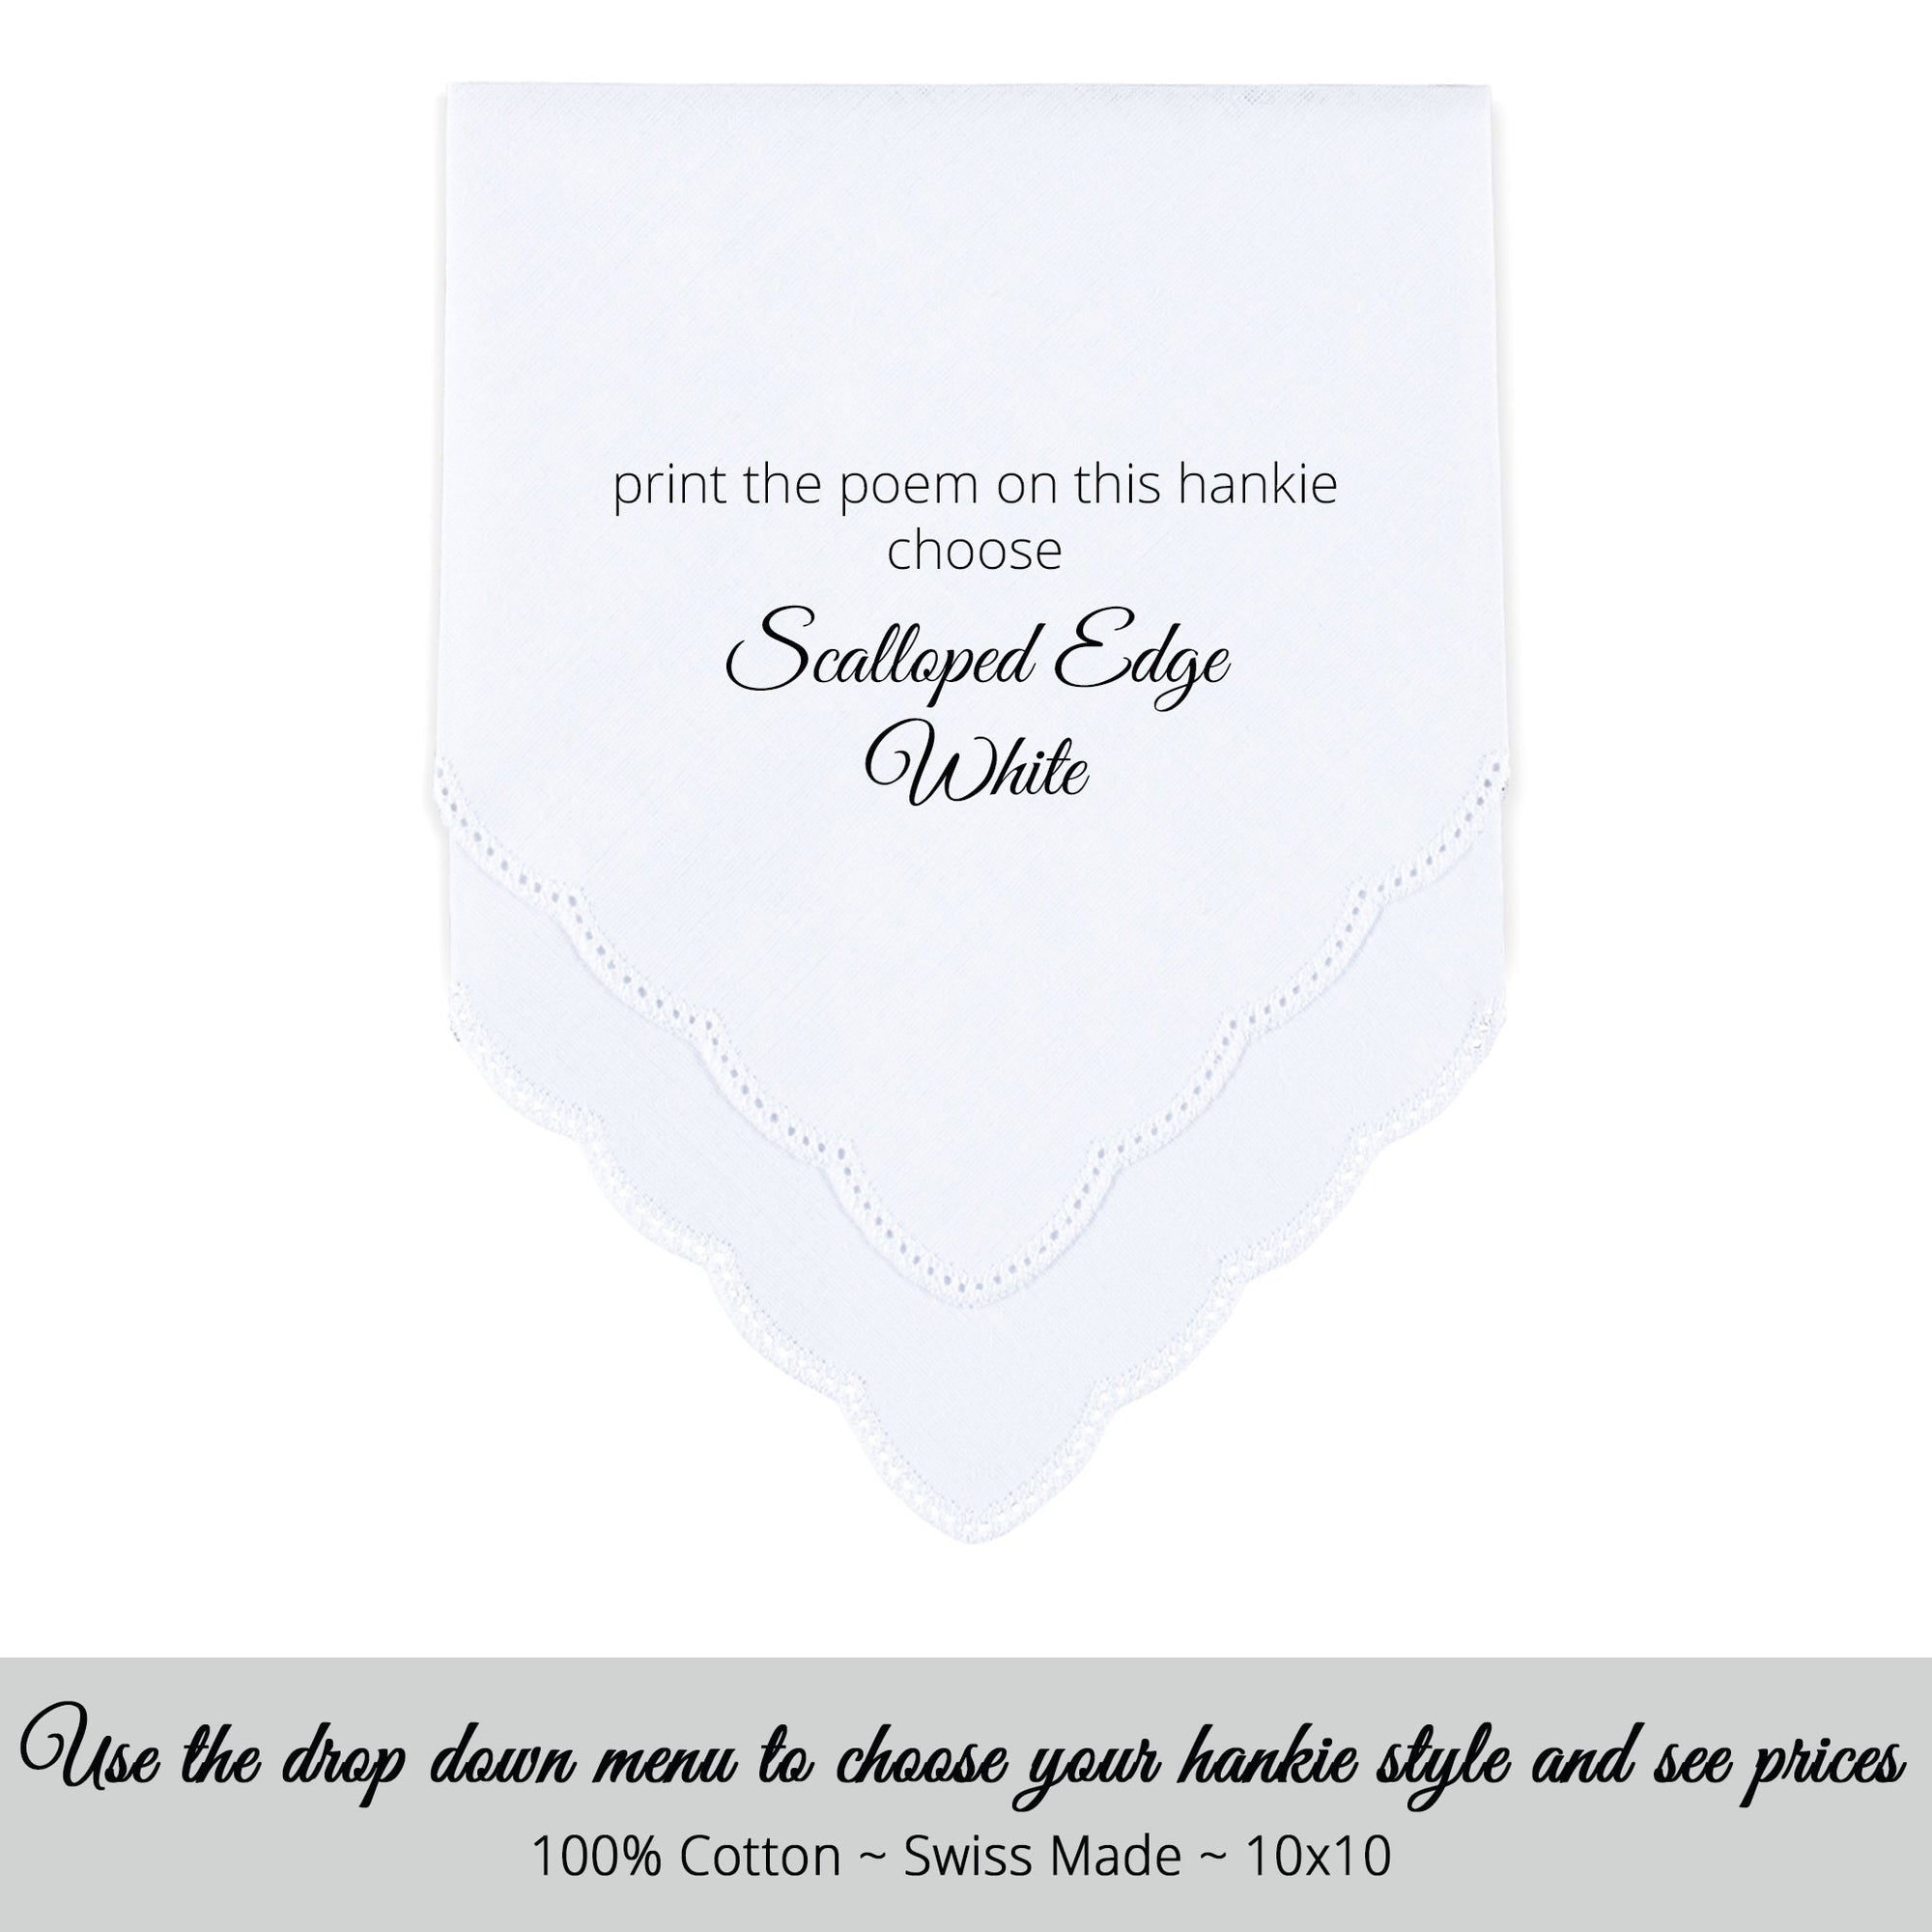 Wedding Handkerchief Scalloped edge white personalized poem for the sister in law of the bride